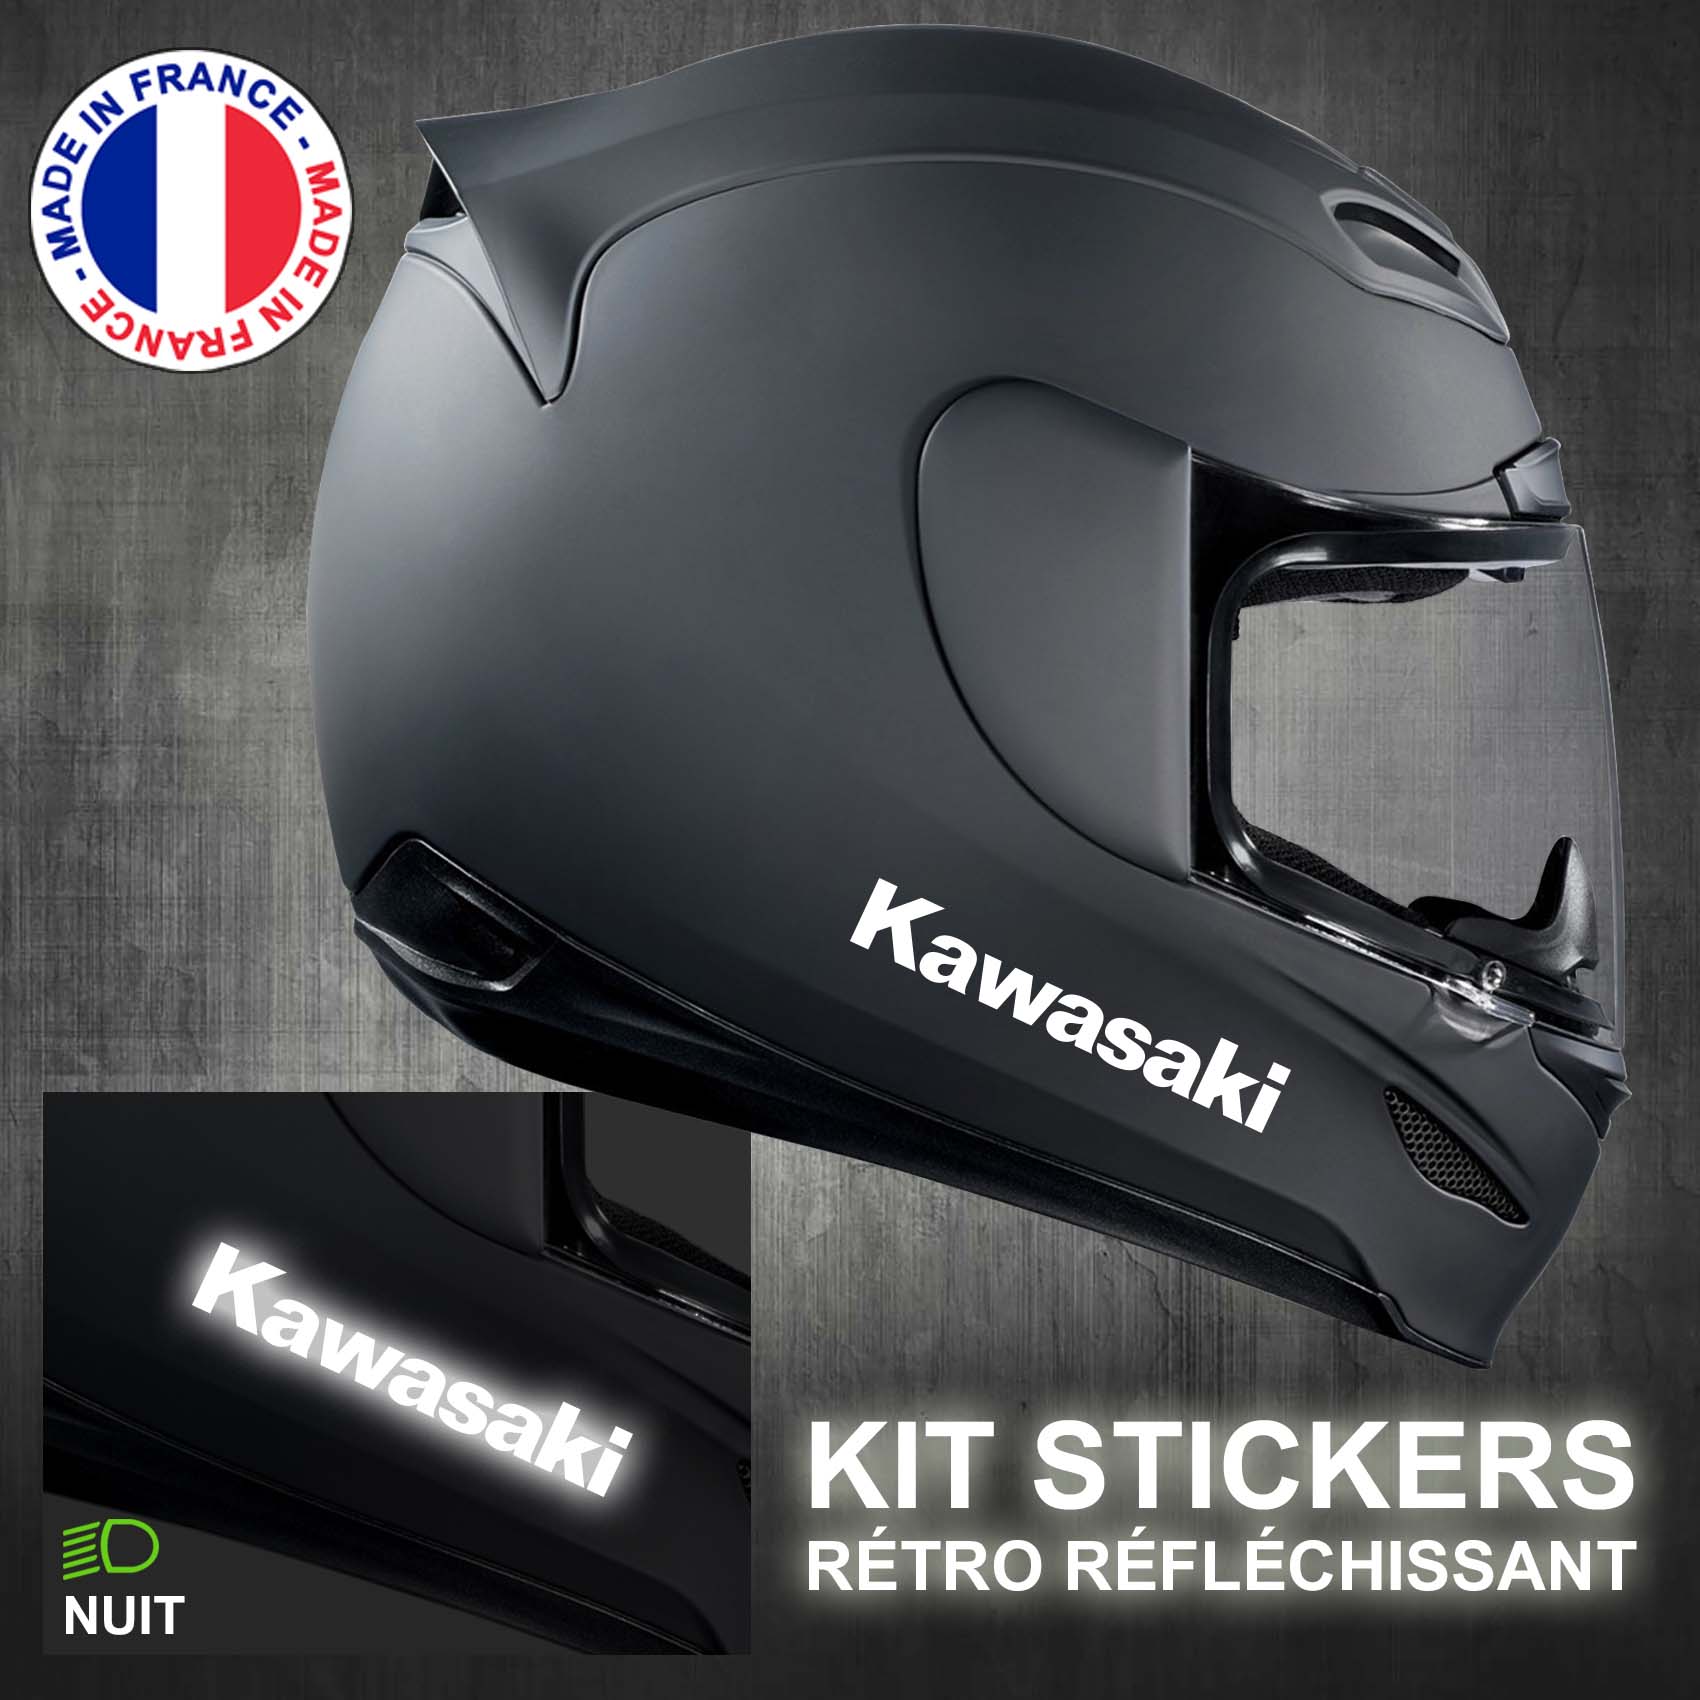 stickers-casque-moto-kawasaki-ref3-retro-reflechissant-autocollant-noir-moto-velo-tuning-racing-route-sticker-casques-adhesif-scooter-nuit-securite-decals-personnalise-personnalisable-min